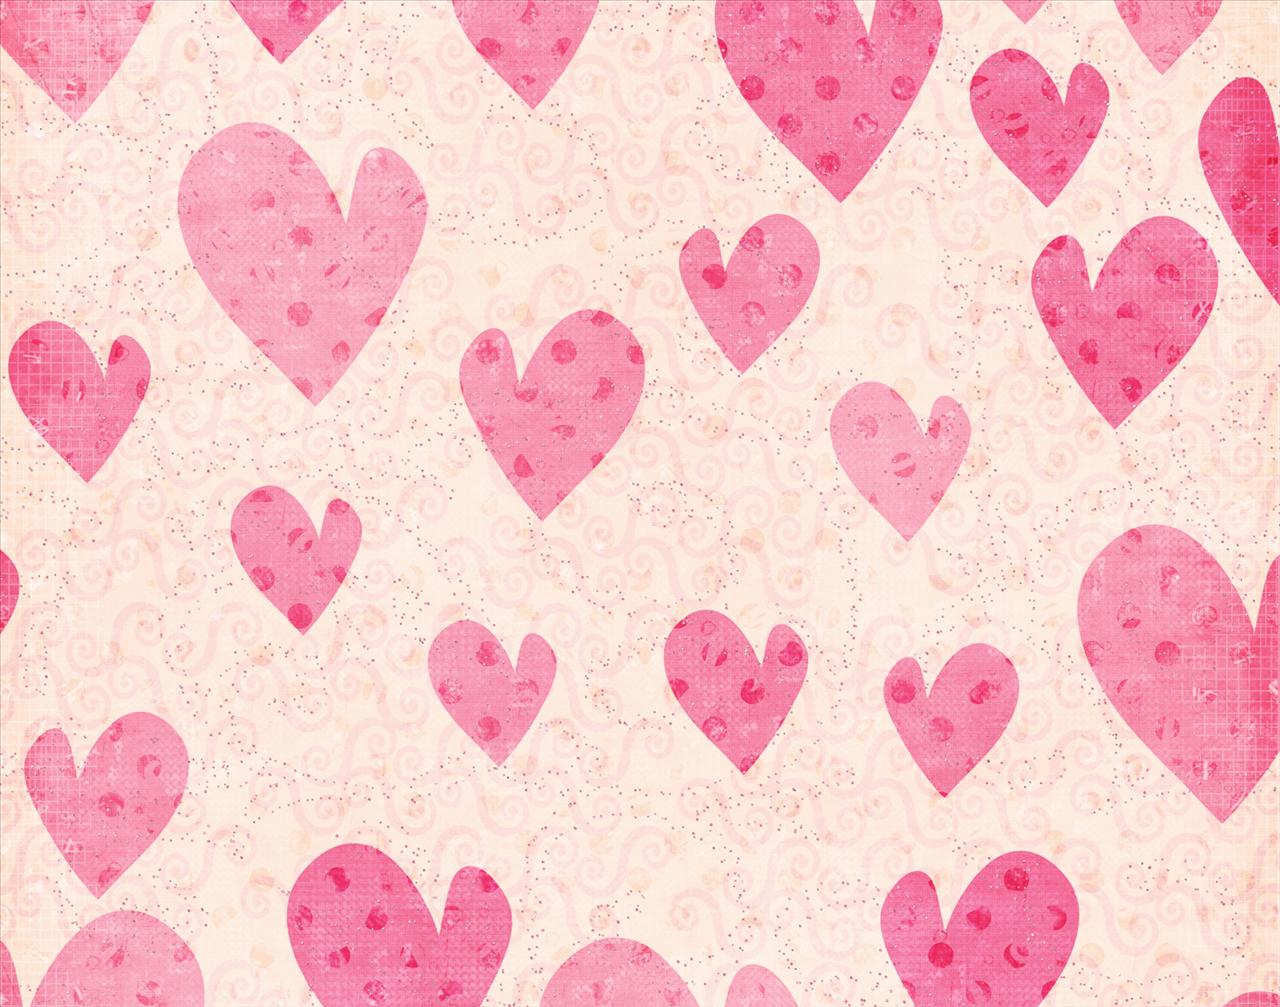 Heart You - Morning Backgrounds